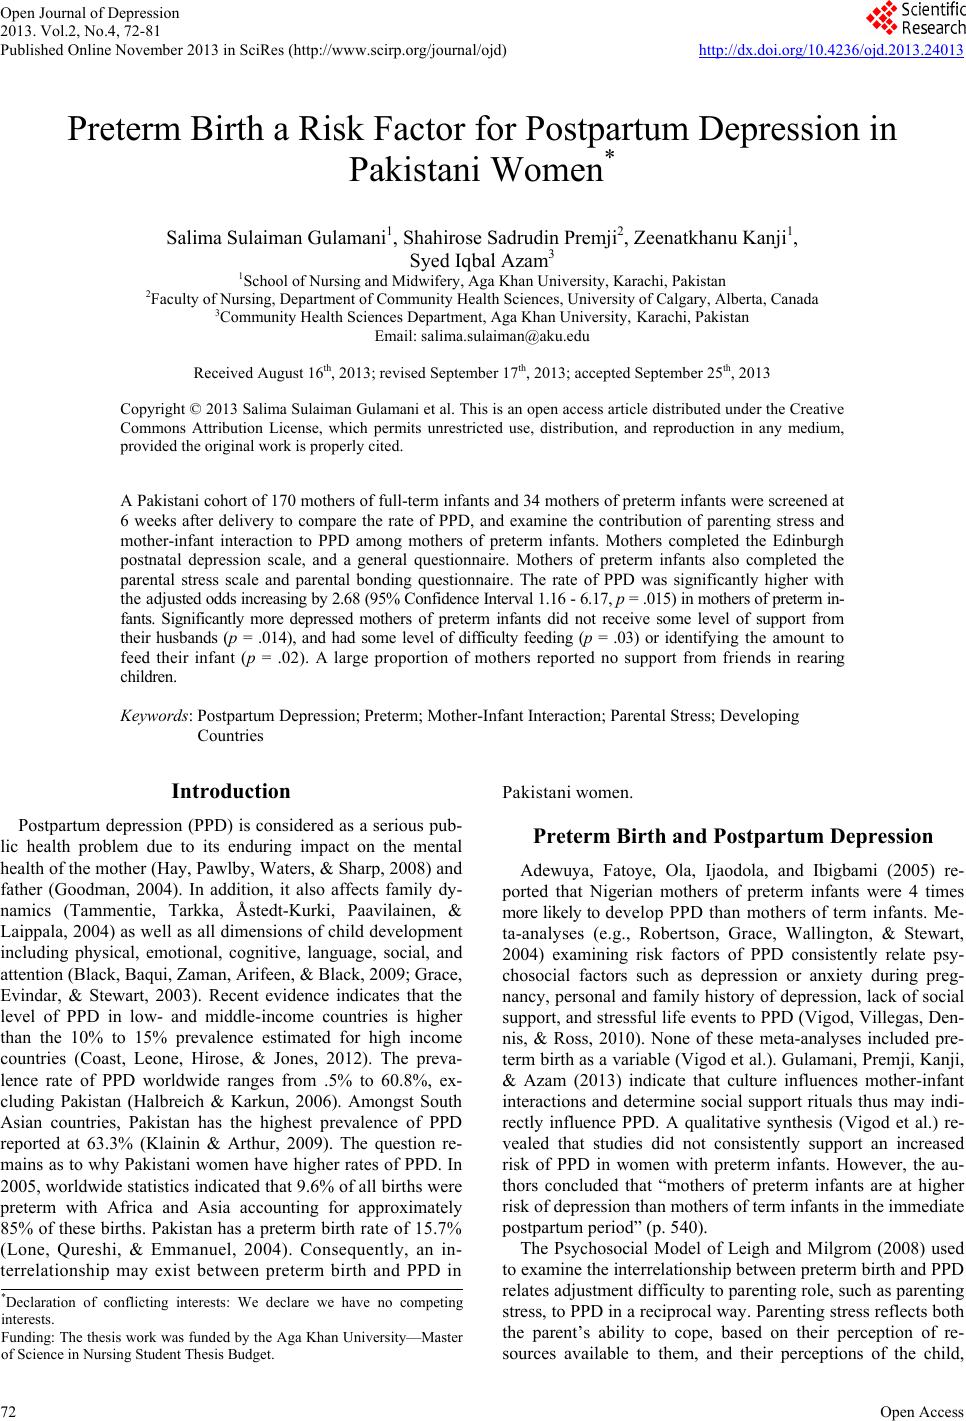 Postpartum depression research papers